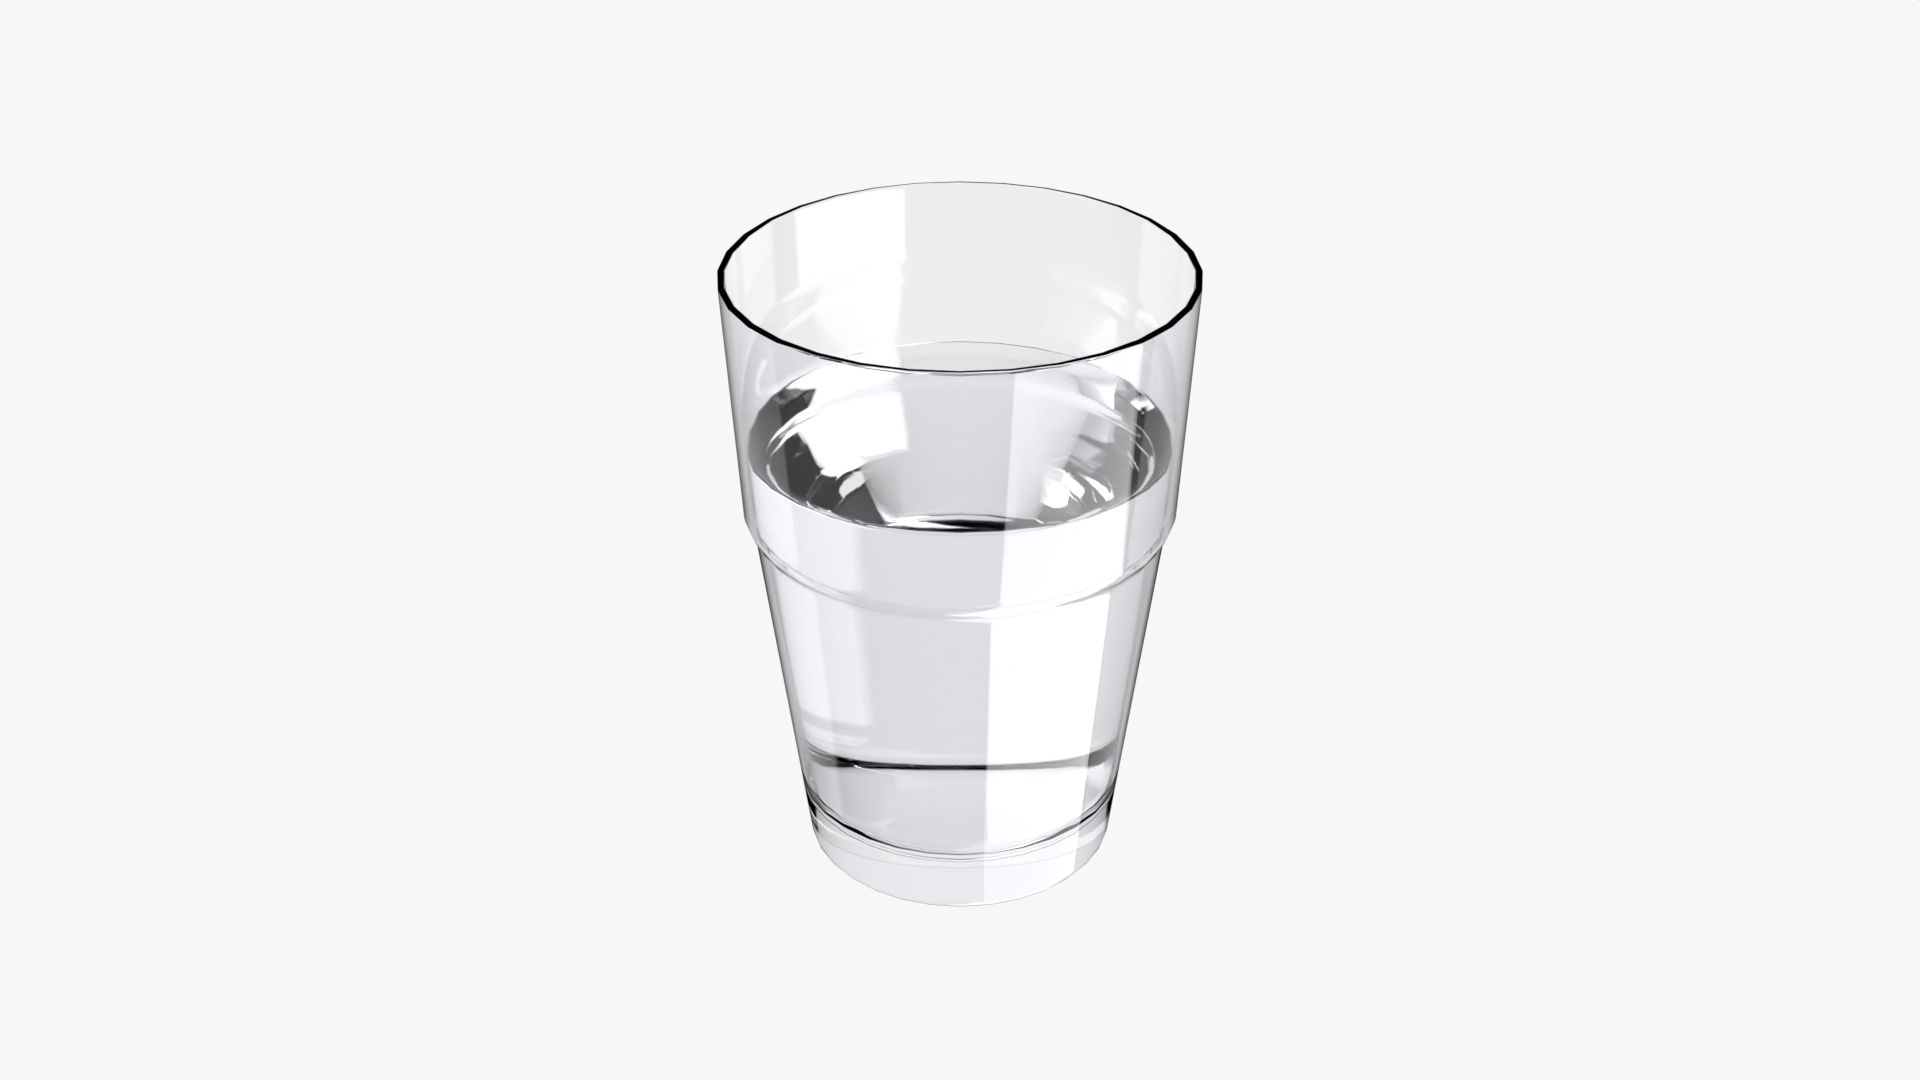 2,437,879 Water Glass Images, Stock Photos, 3D objects, & Vectors